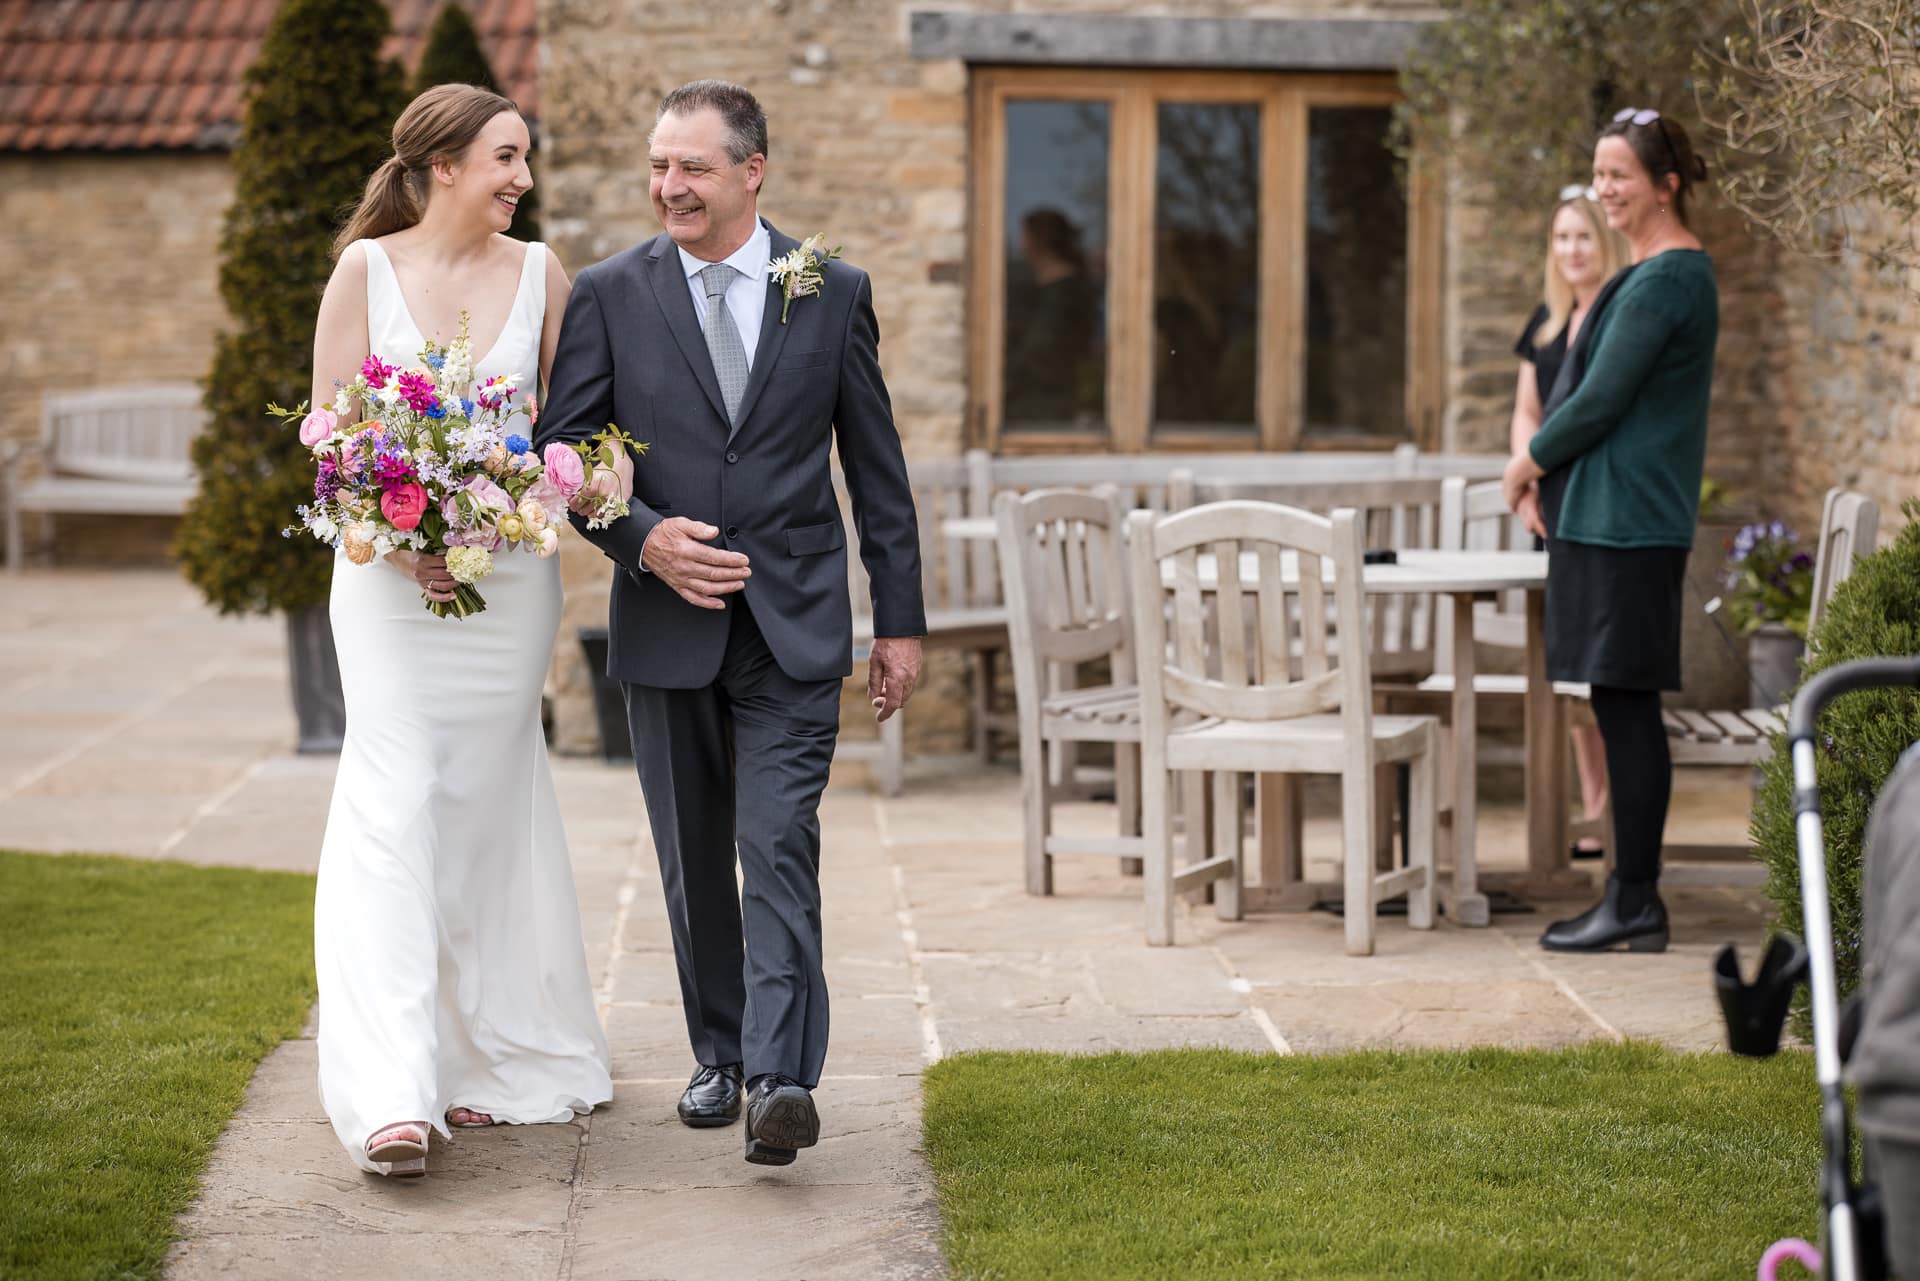 Bride and Father of the Bride at Kingscote Barn Wedding